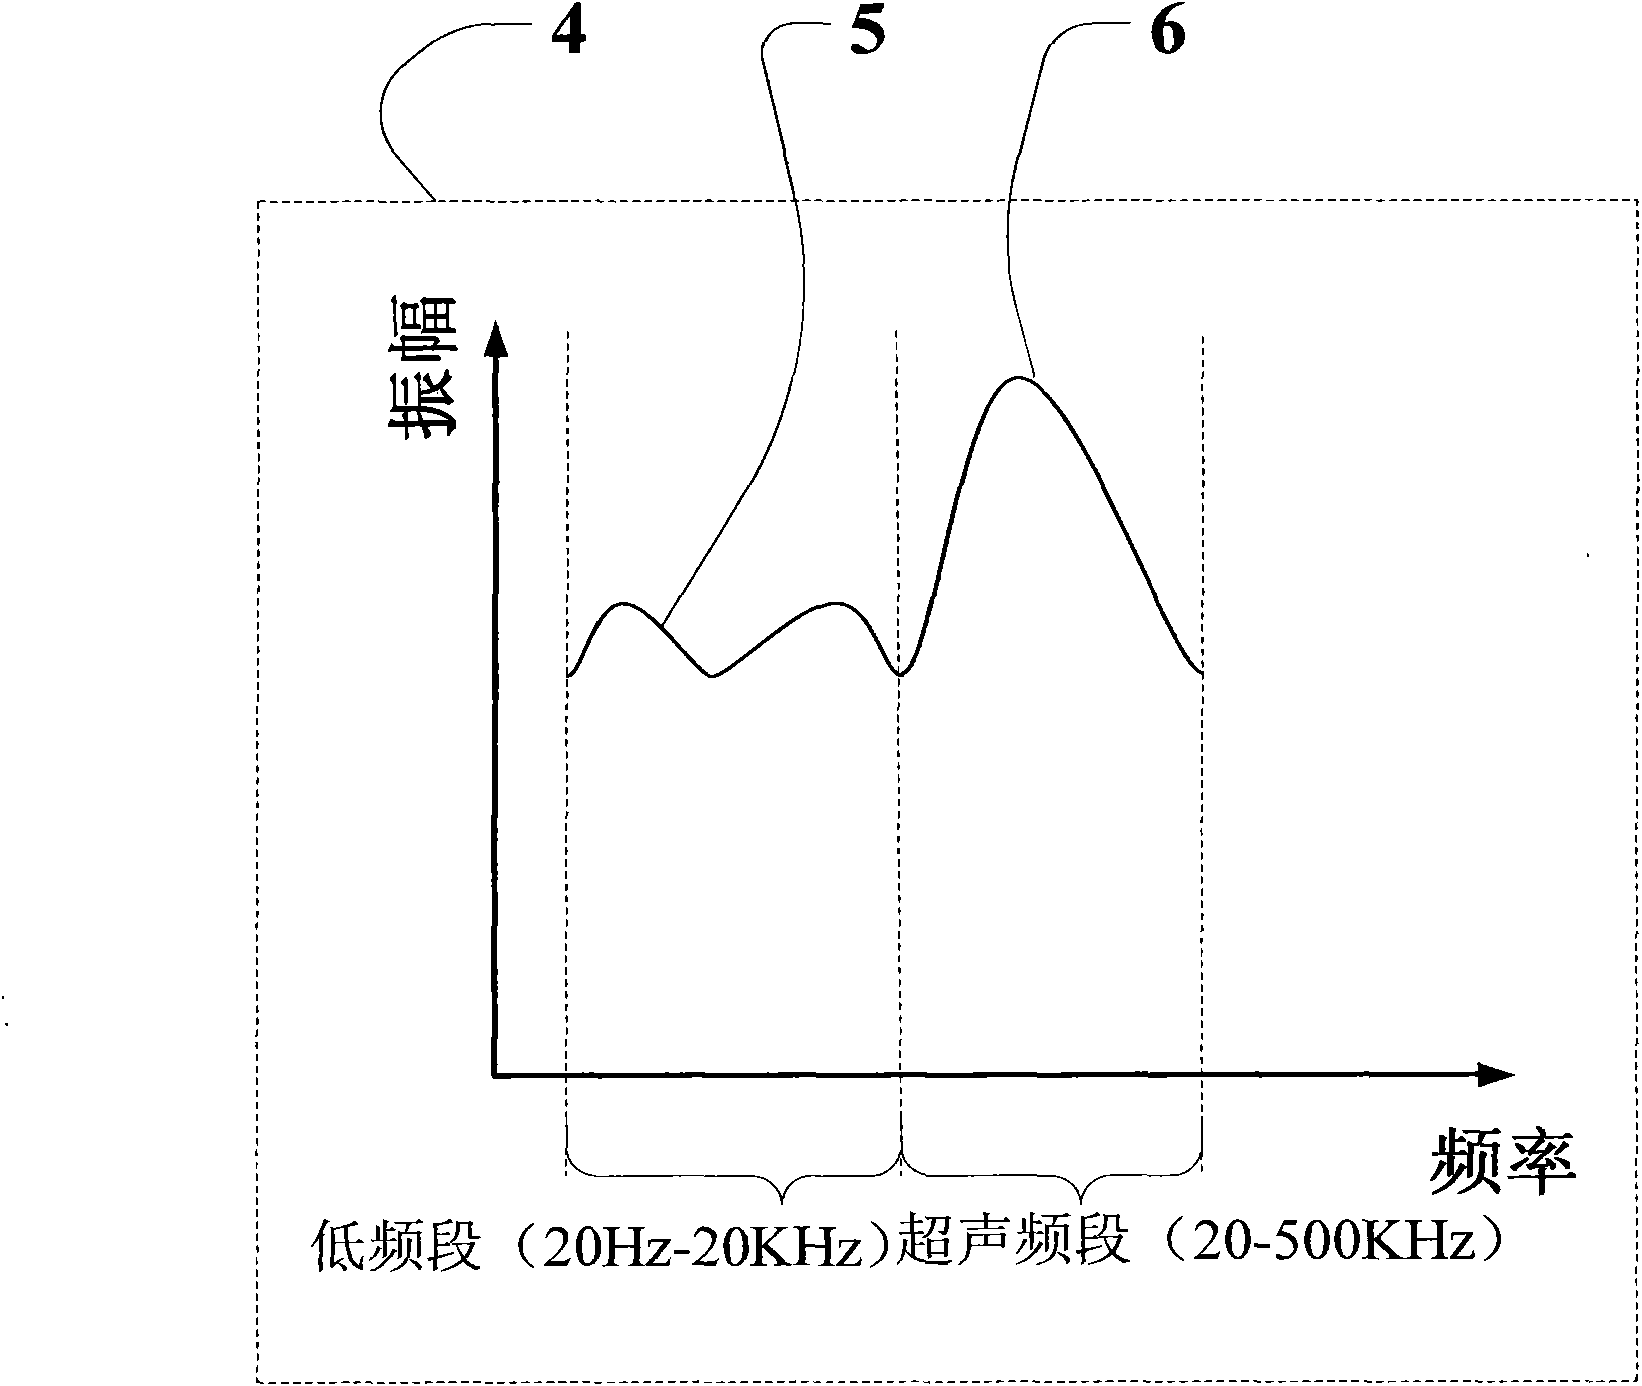 Micro speaker with directional transaudient function